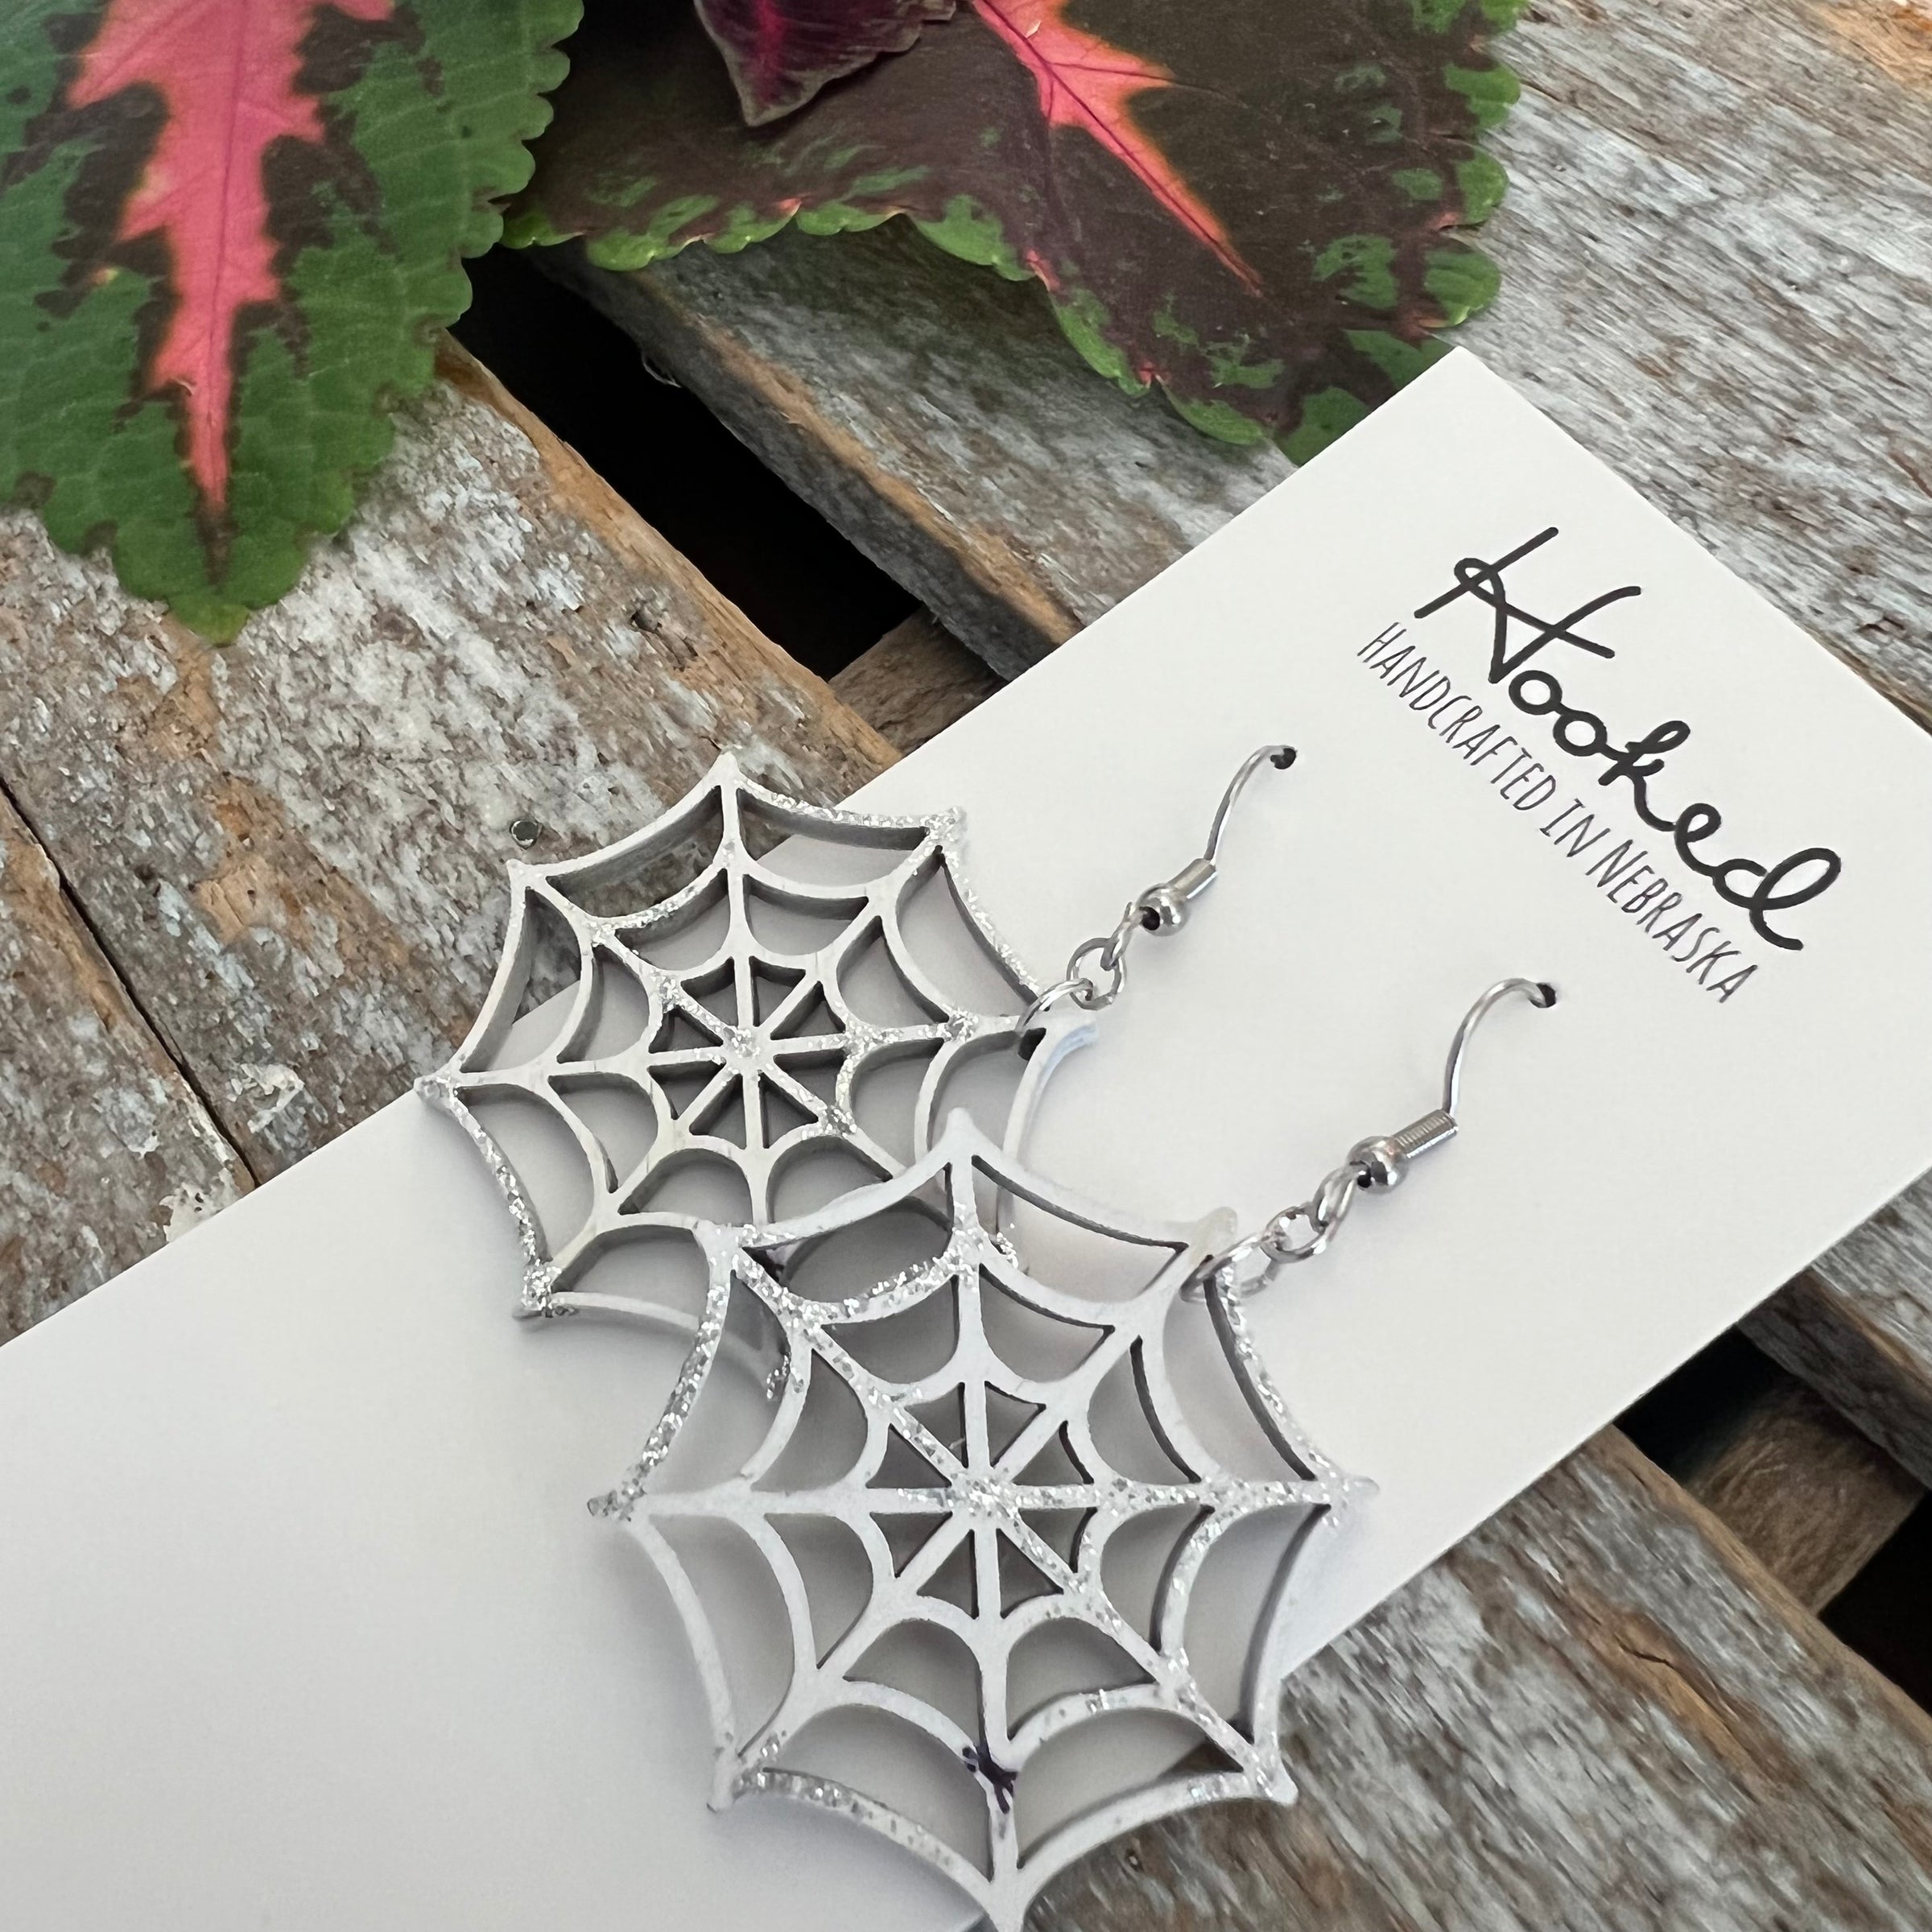 Wooden Cutout Earrings - White Spider Webs